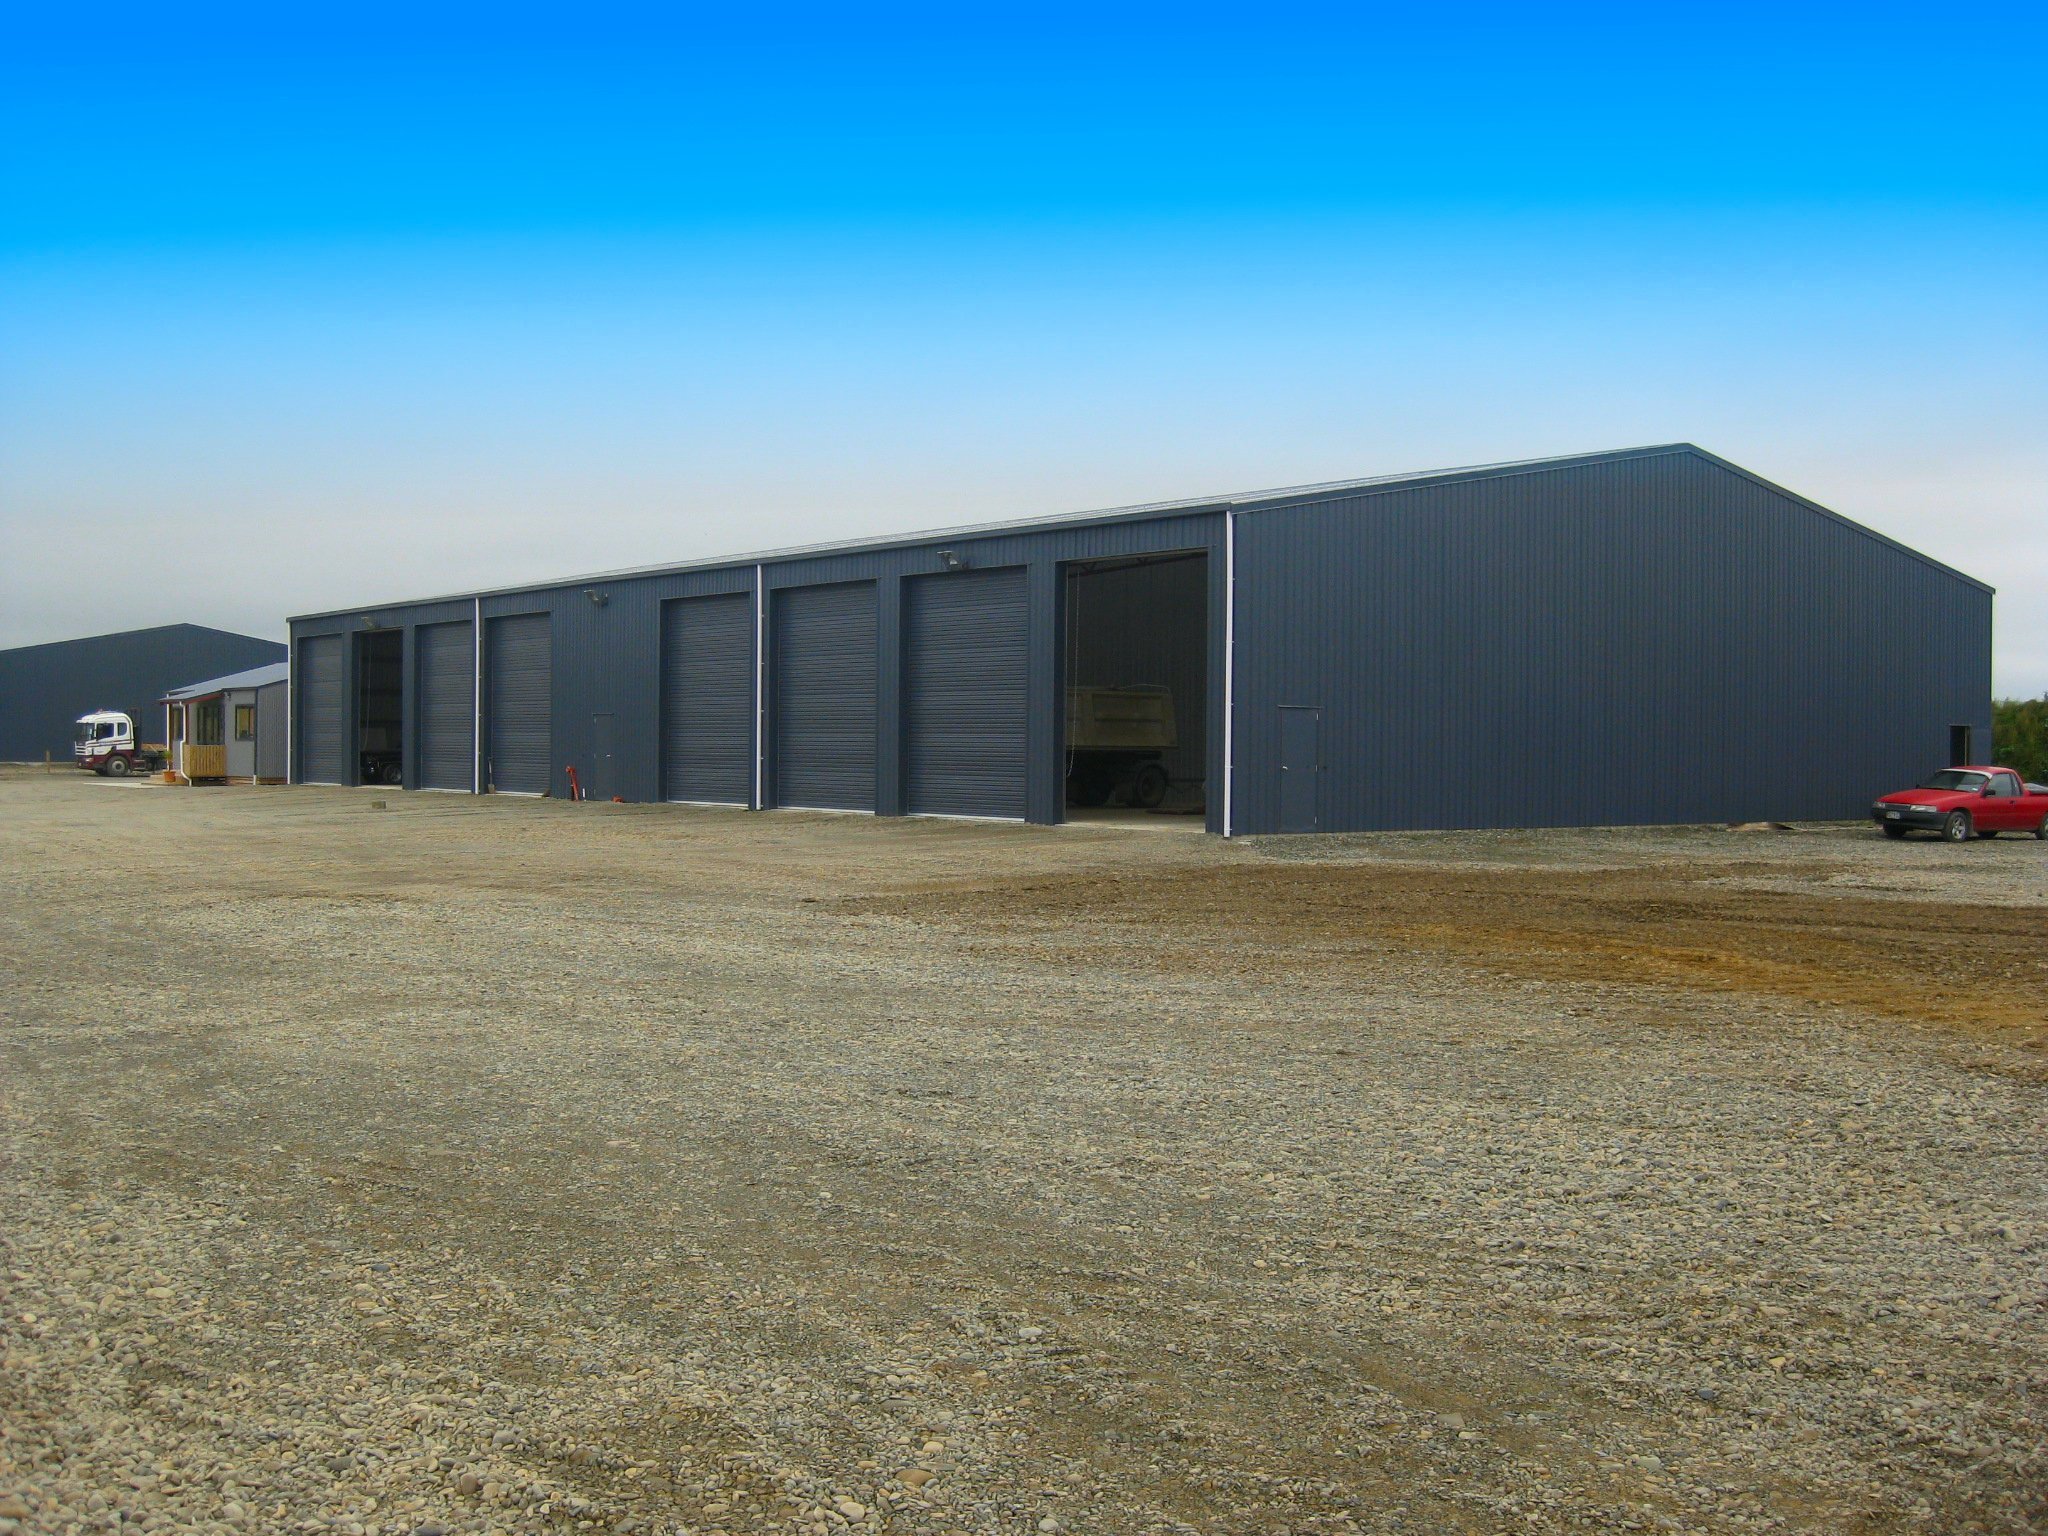 Our large workshop sheds are easy to build